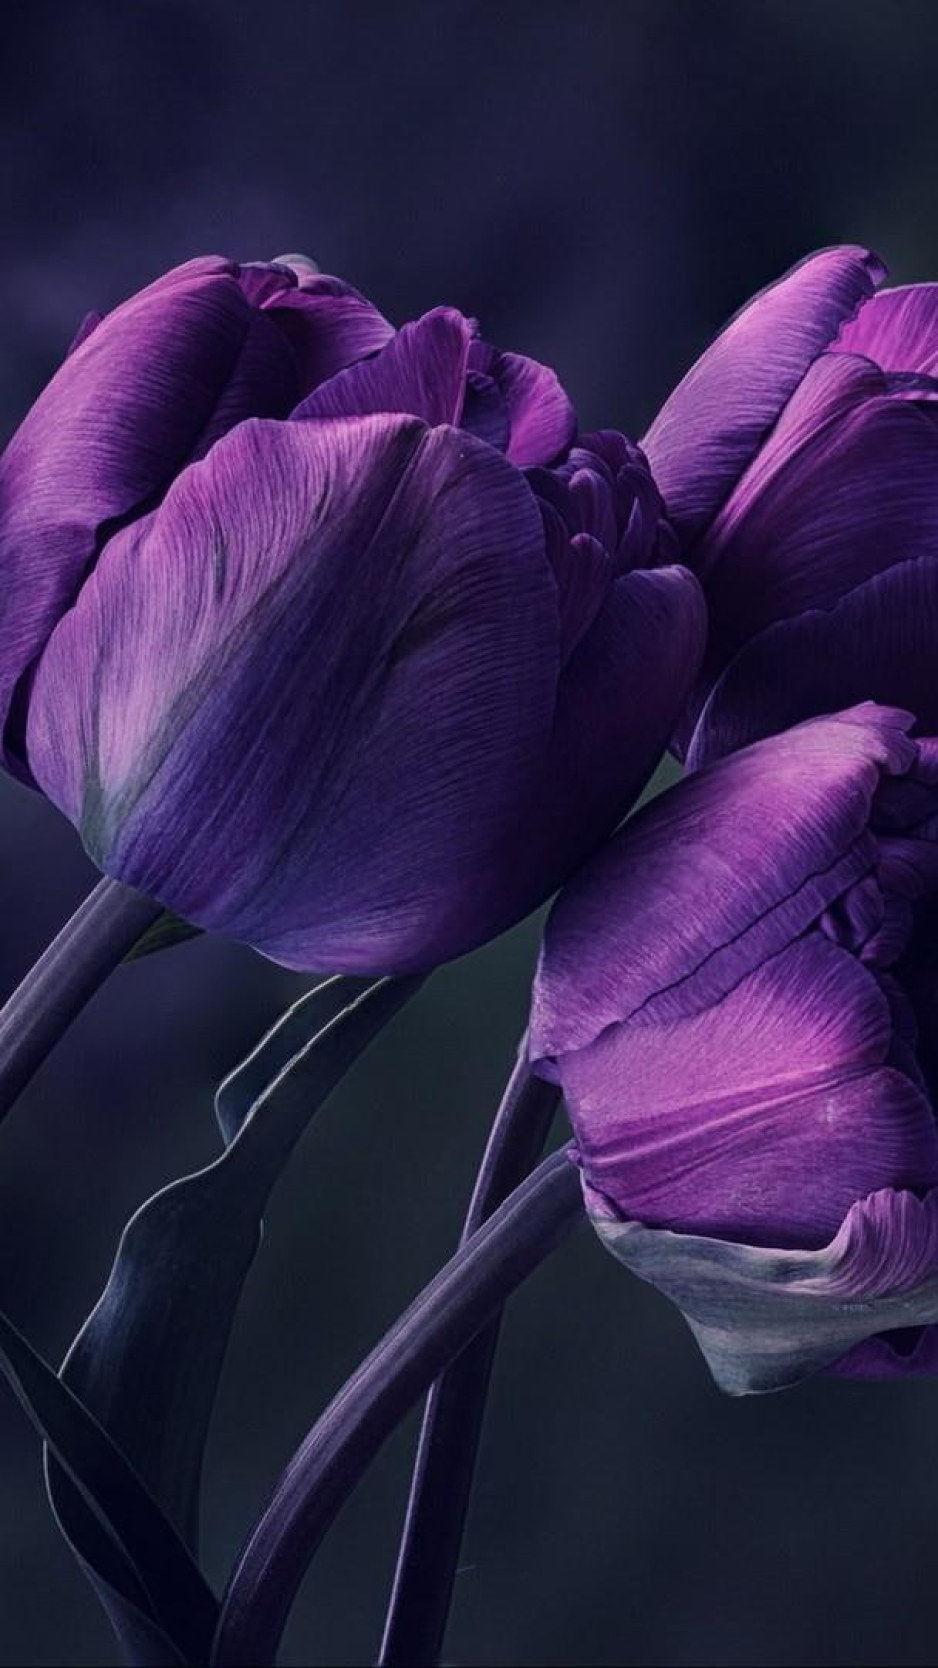 Purple Tulip Flower, Tulips, Particular, Special, Beautyful, Amazing Wallpaper • Wallpaper For You